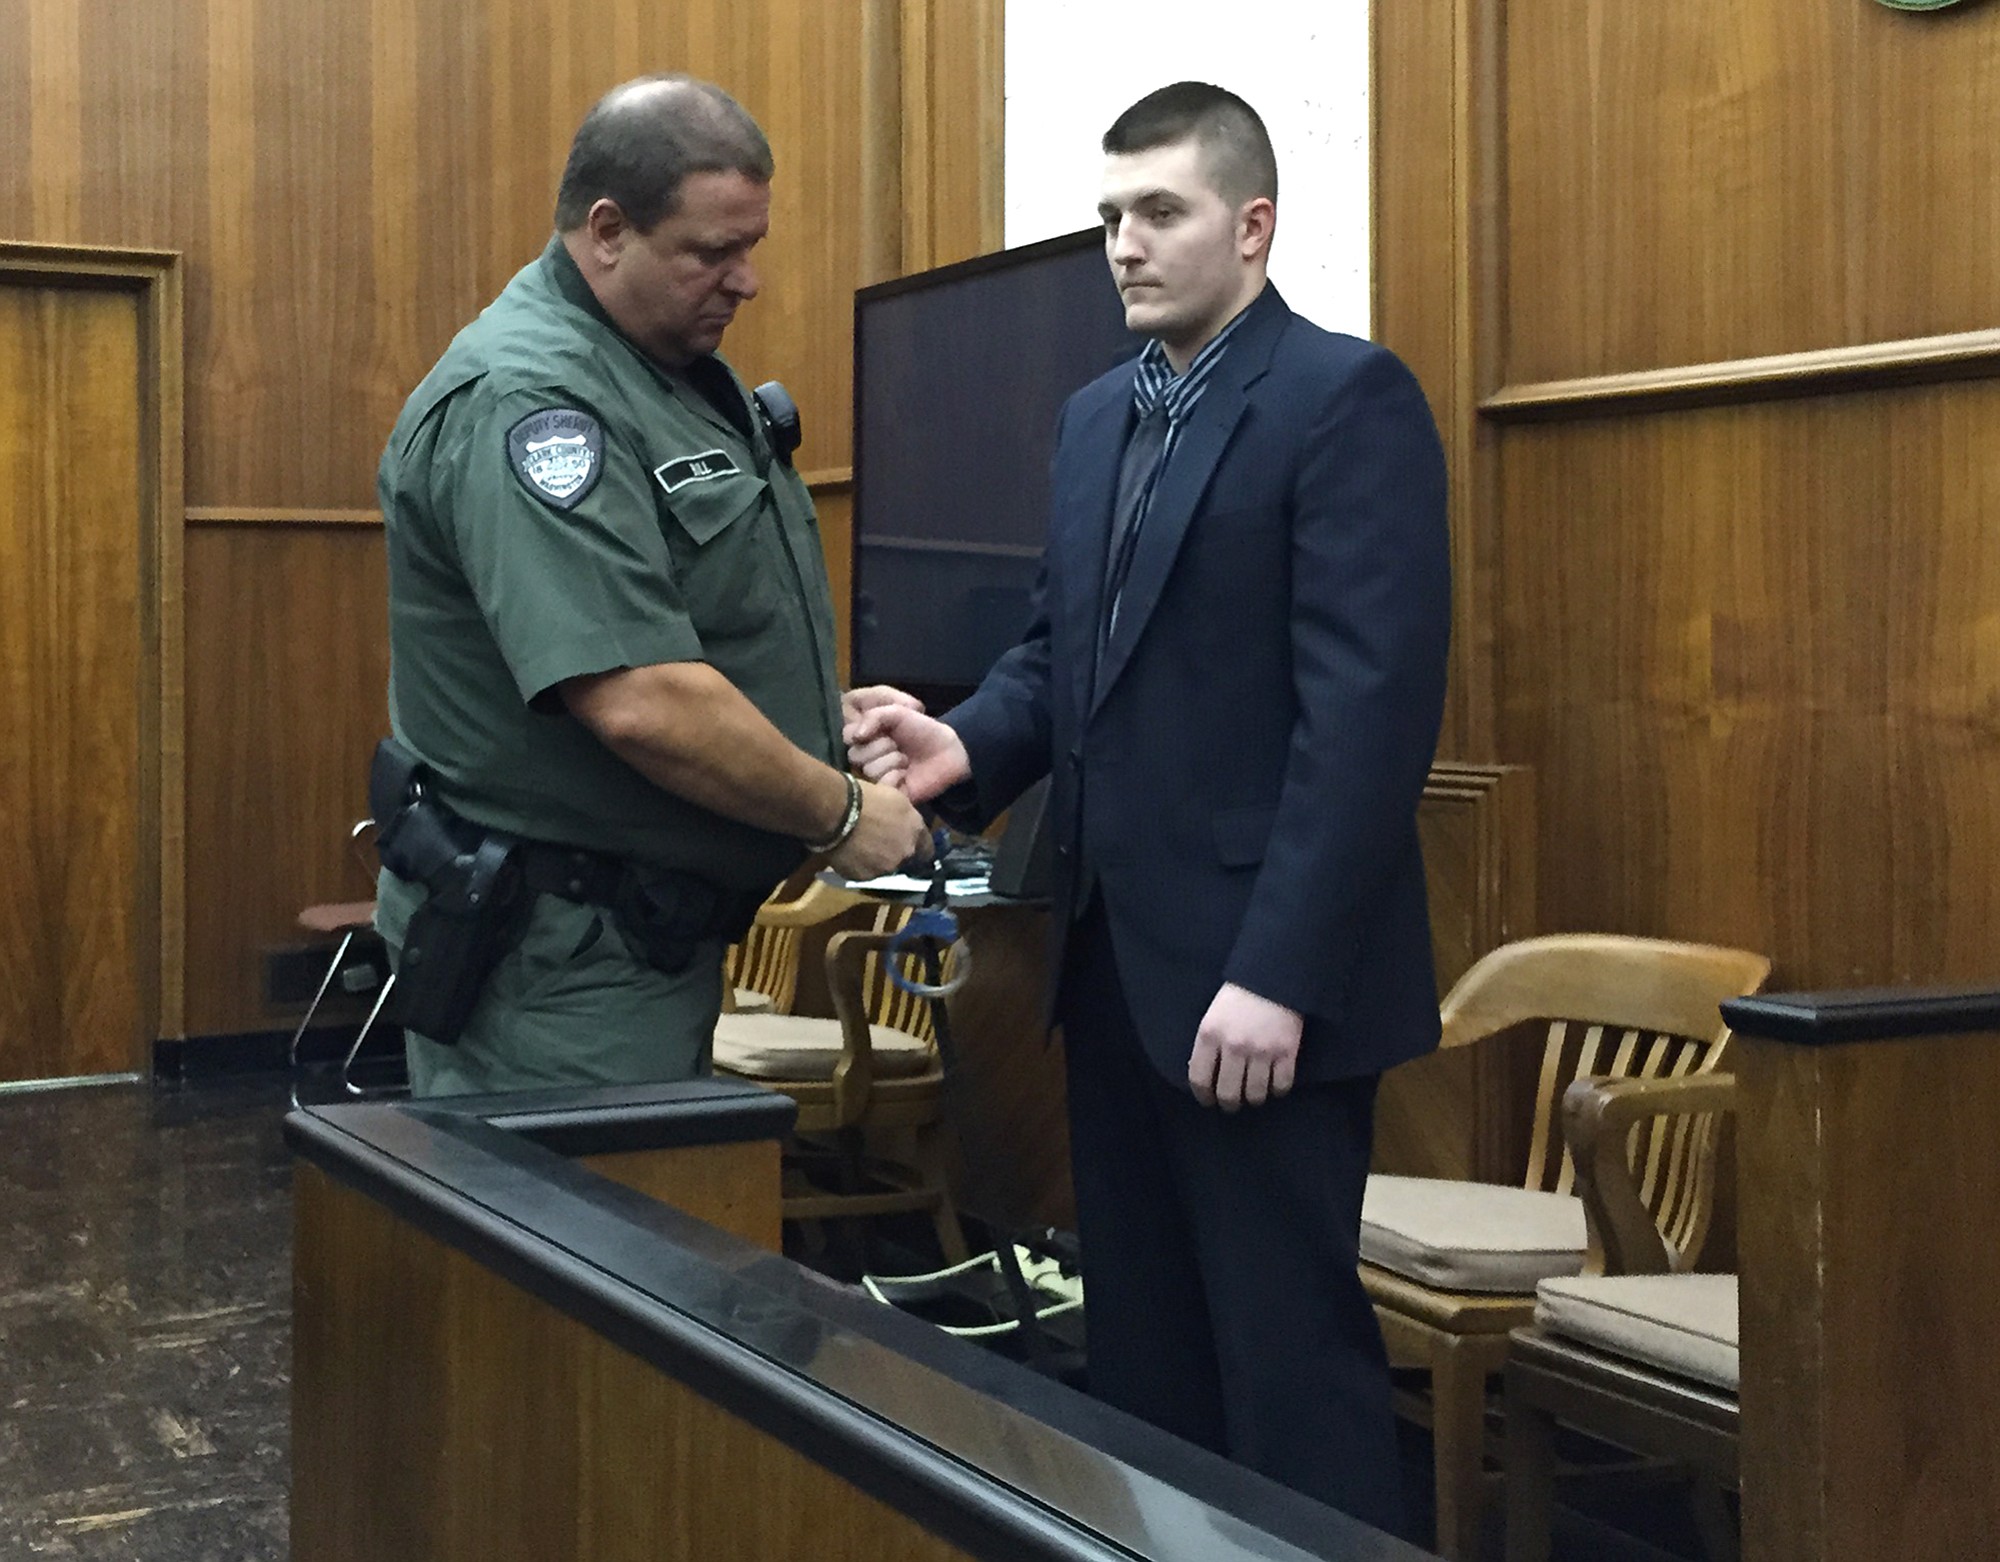 Jarrod Wiebe, 27, of Snohomish is escorted out of Clark County Superior Court Judge Scott Collier's courtroom after a jury found him guilty of 16 felony charges related to a home-invasion robbery in Ridgefield in December.